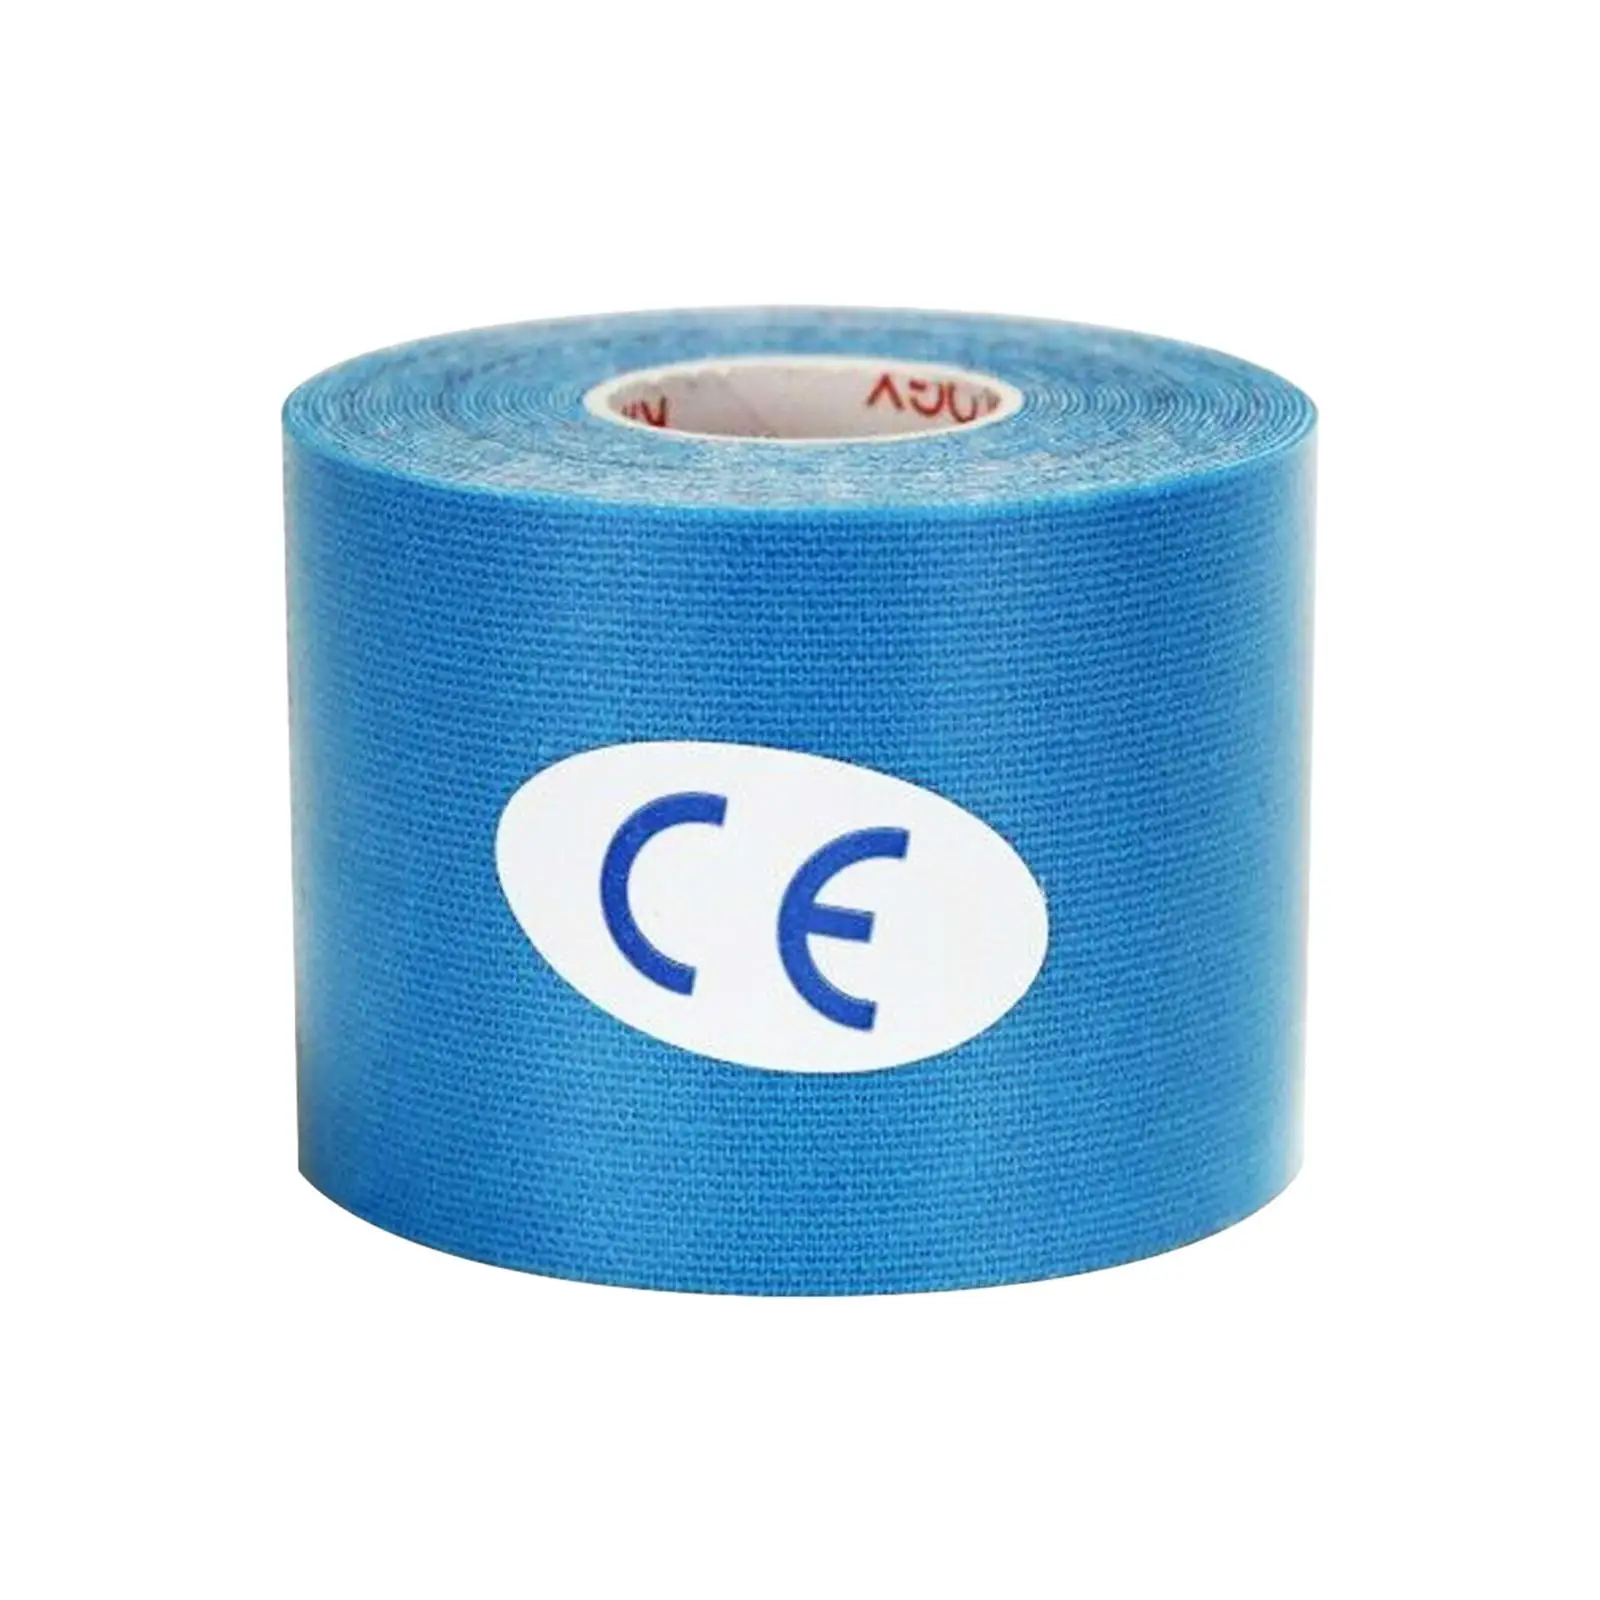 Sports Wrap Tape Wrap Waterproof Muscle Tape Breathable 5cmx5M Athletic Tape Protective Tape for Wrists Ankles Body Chest Gym